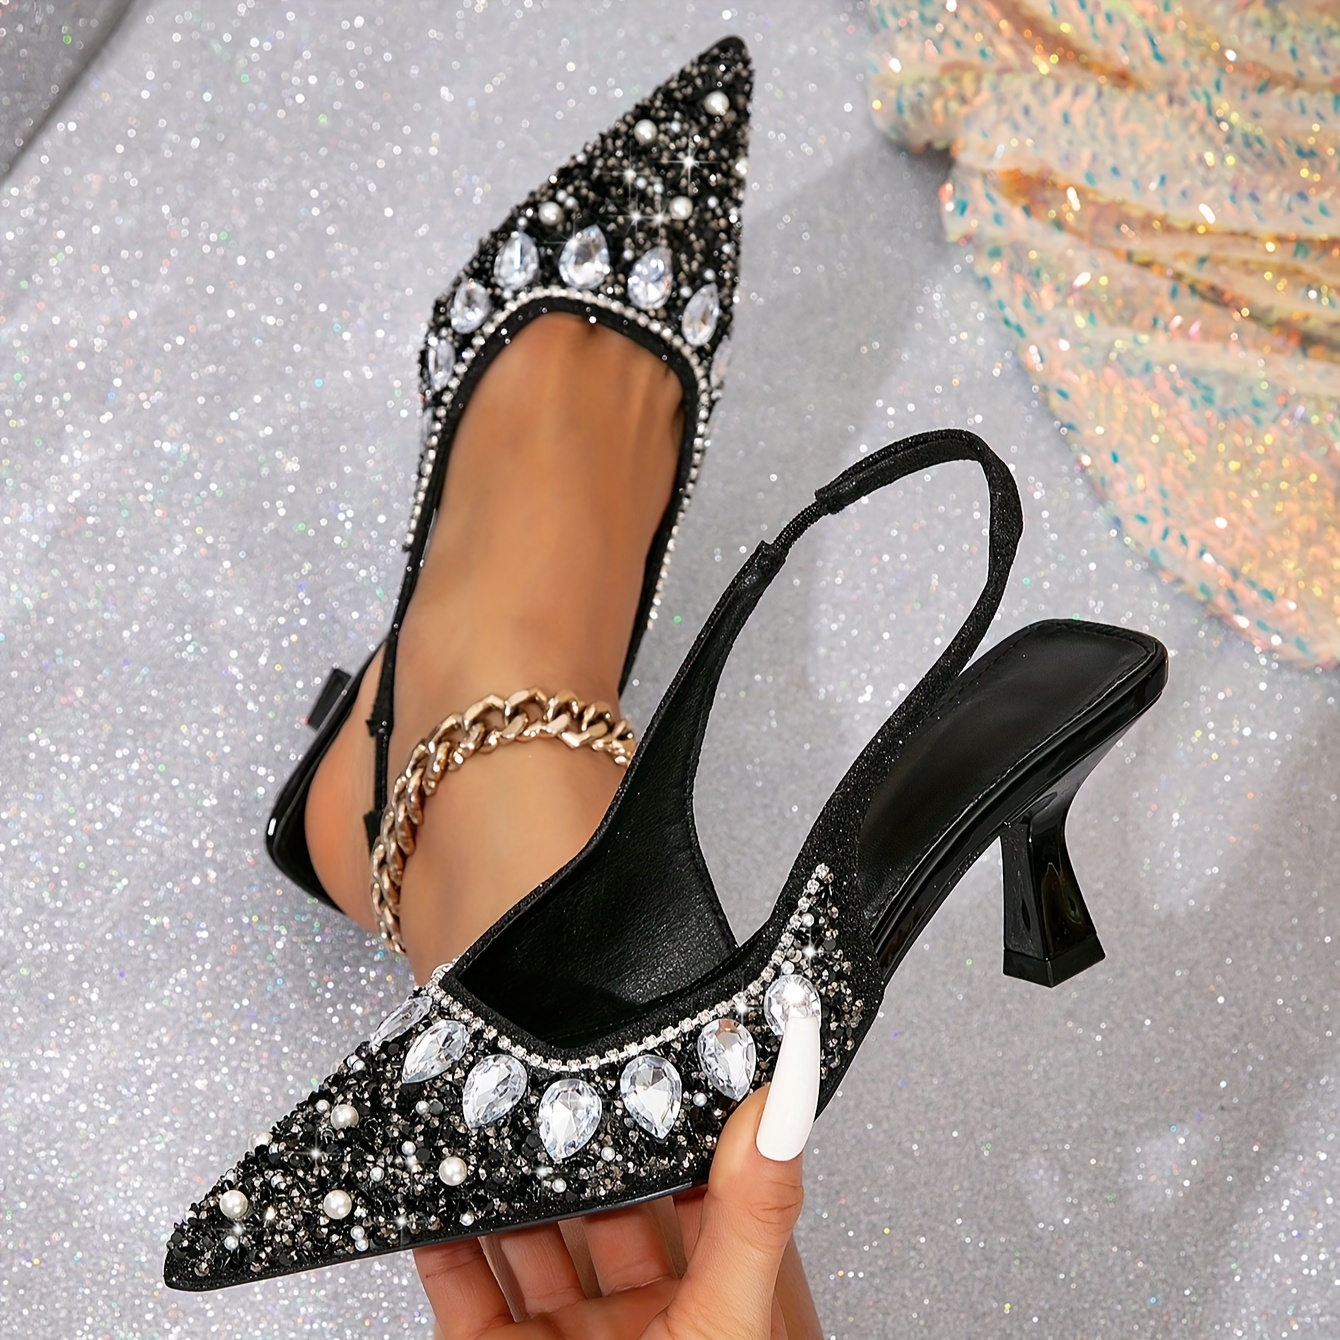 

Women's Pointed Toe Slingback Sandals, Fashion Rhinestone And Faux Pearl Embellished Kitten Heels, Glitter Party Dressy Shoes